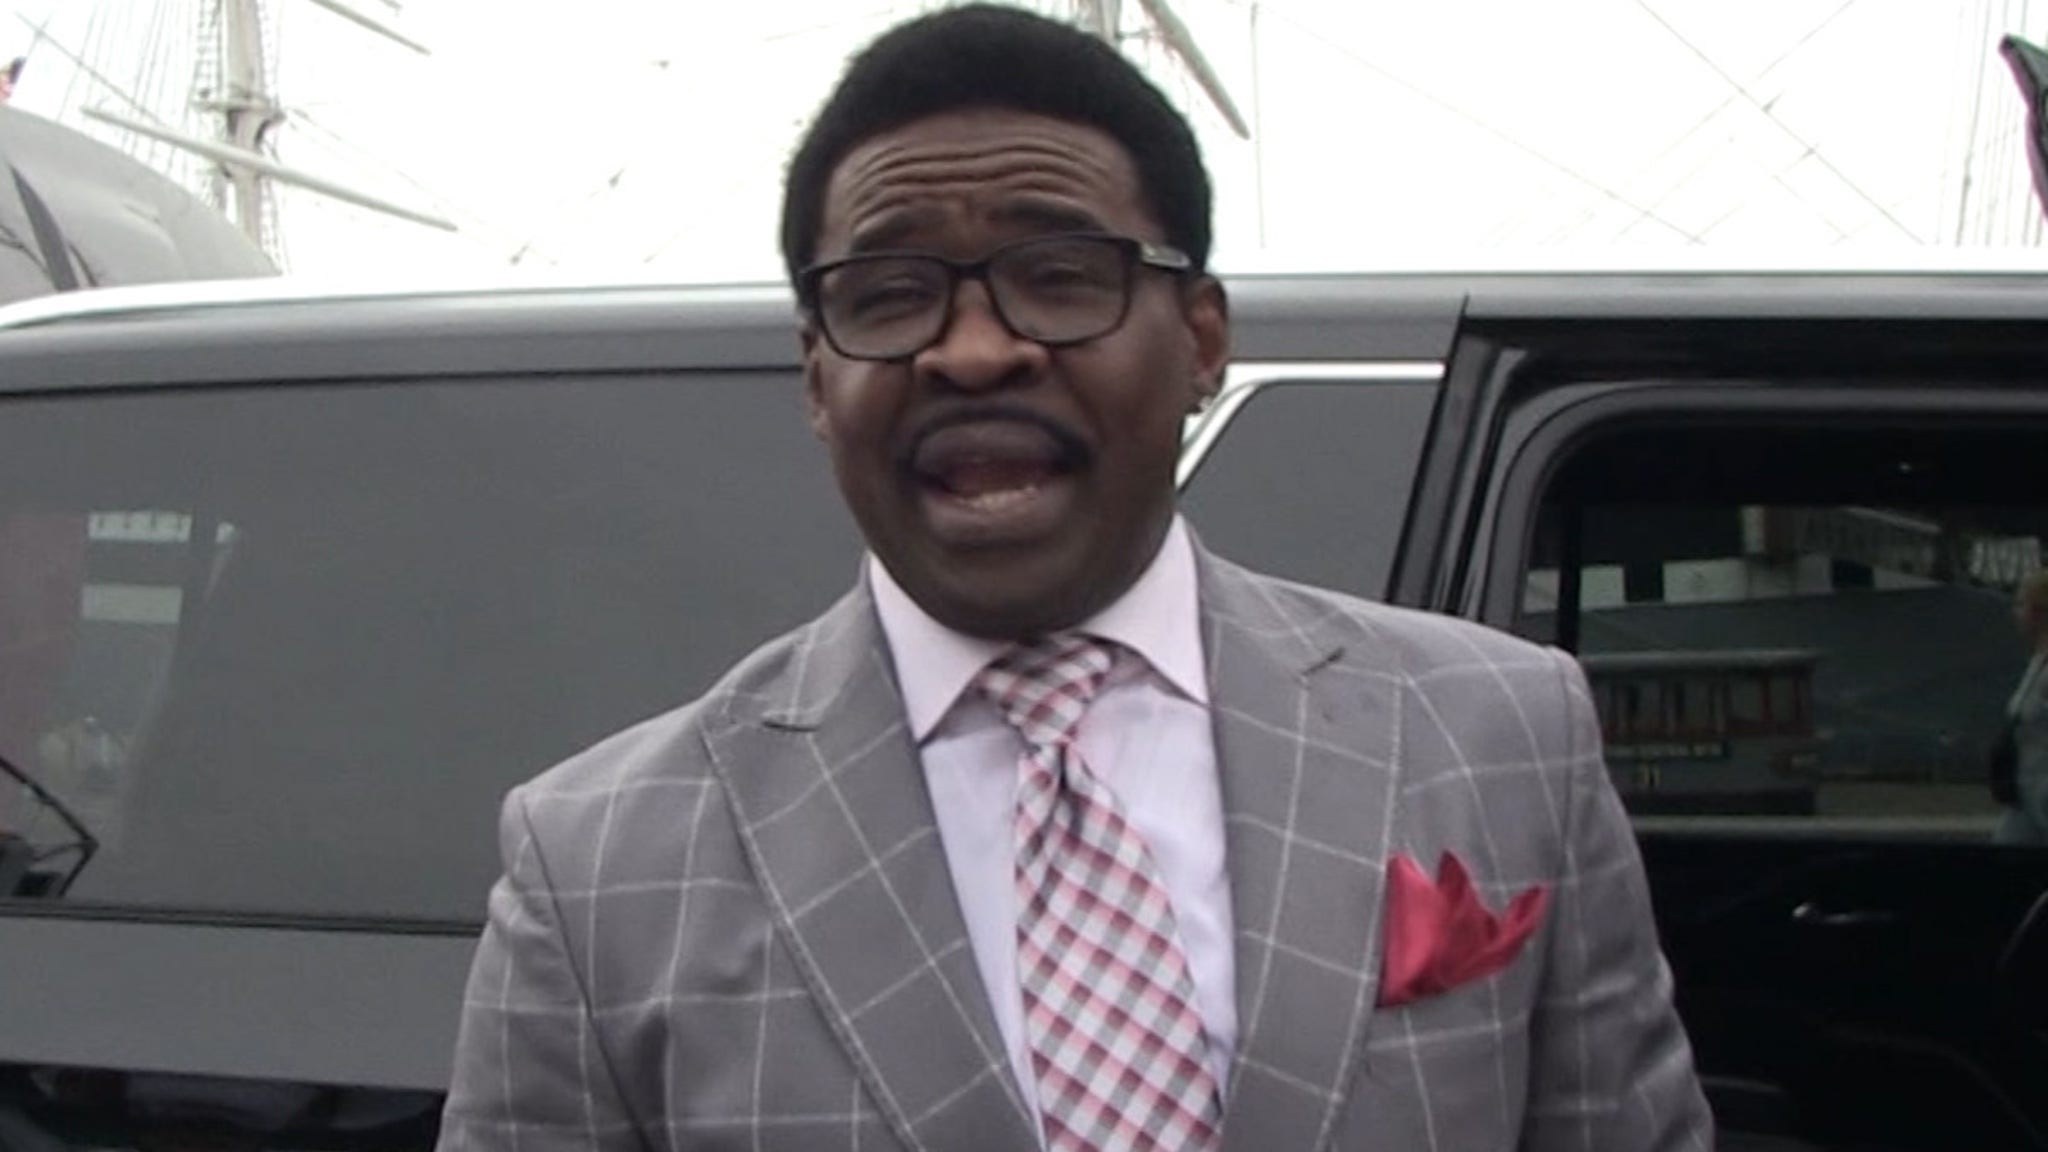 Michael Irvin Files Scathing Lawsuit Against Misconduct Accuser, Seeking $100 Mil thumbnail